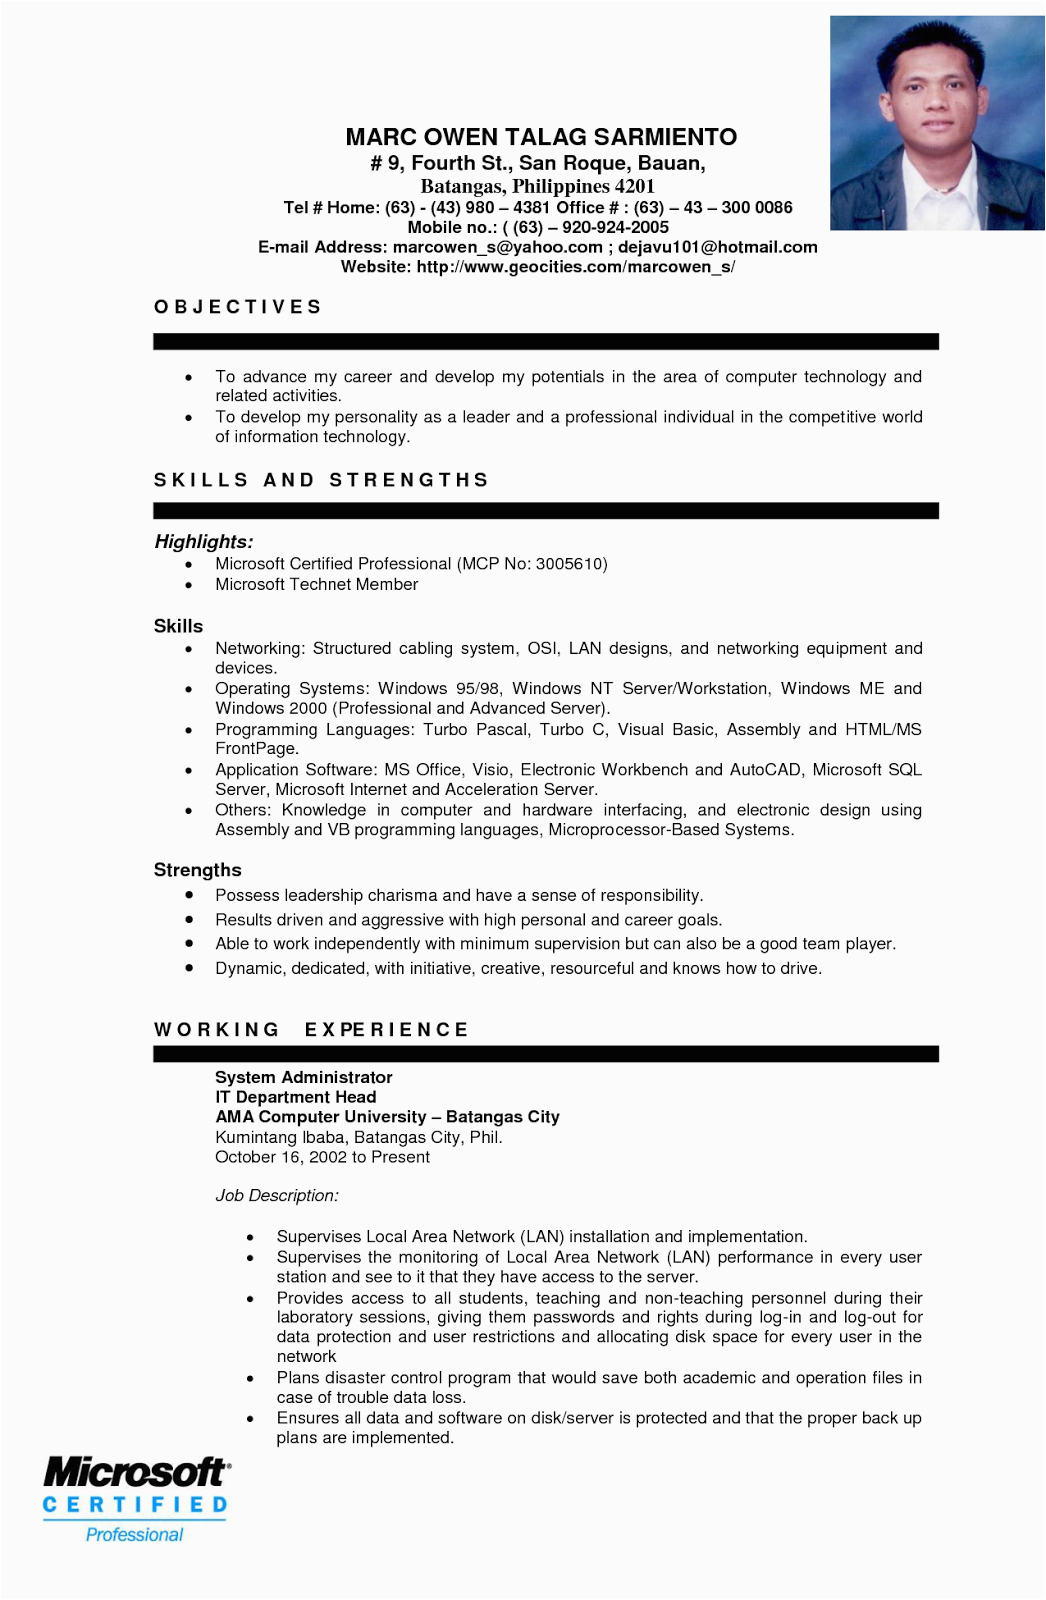 Sample Resume format for Ojt Accounting Students Resume Skills for Ojt Accounting Students Eggreceipt